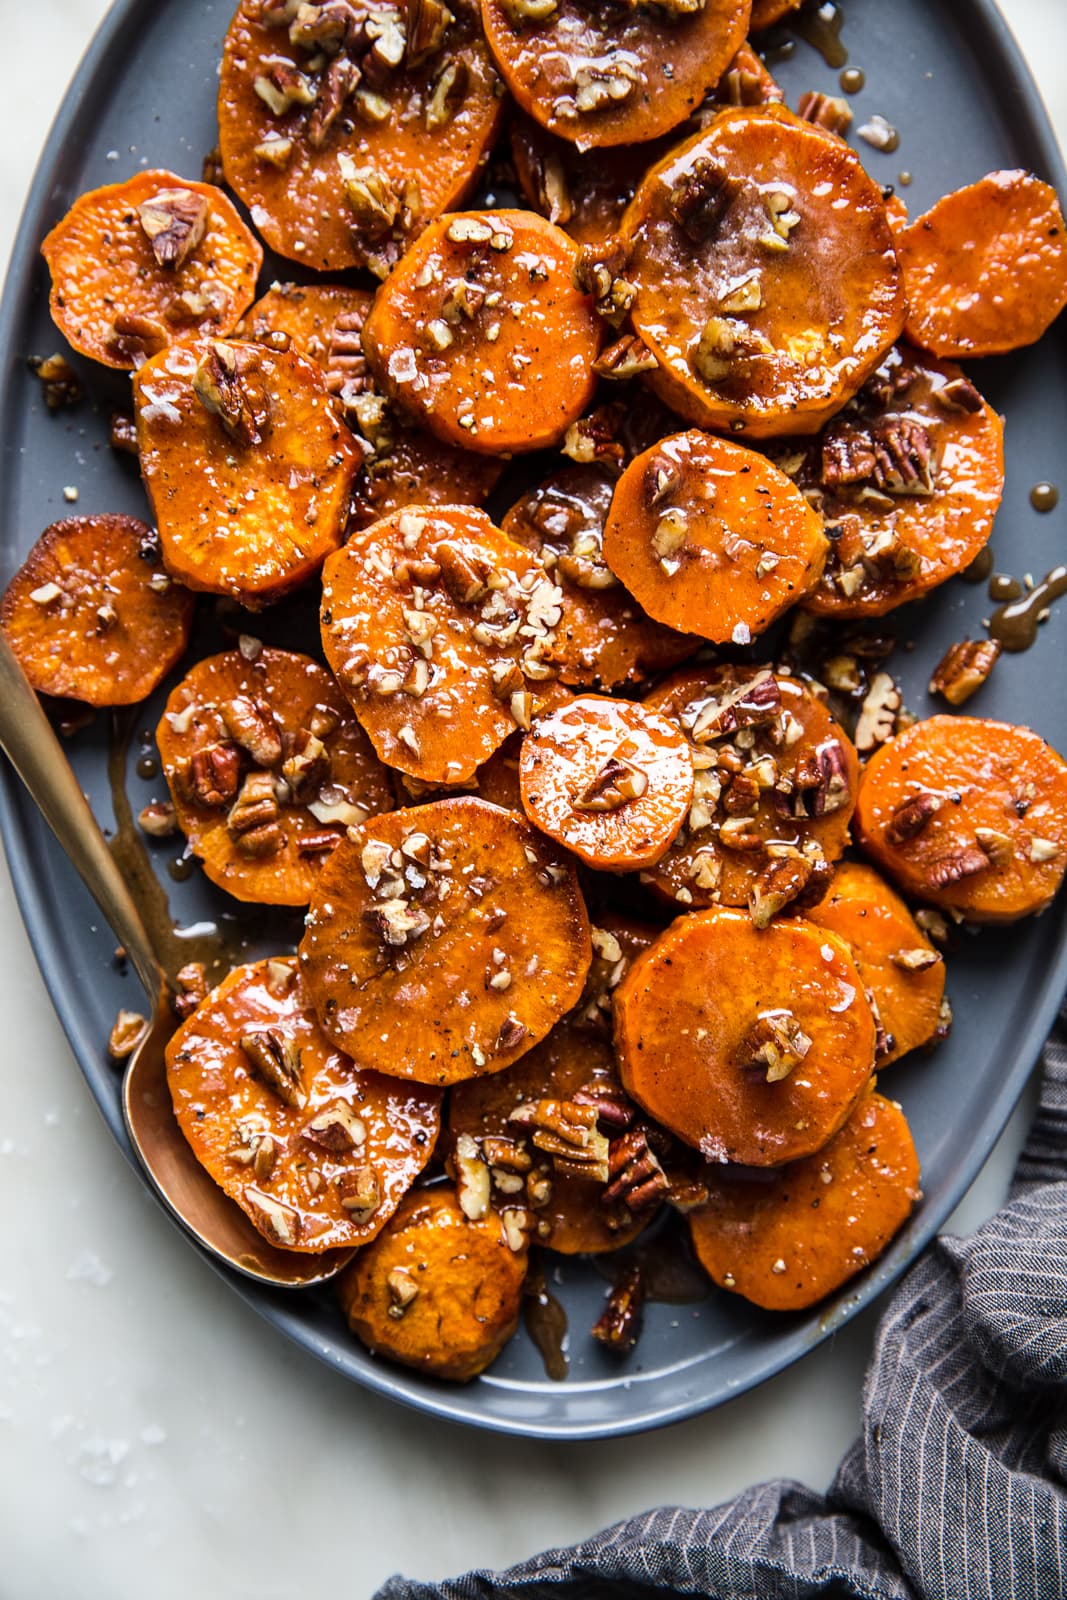 Candied Yams with Honey and Brown Sugar